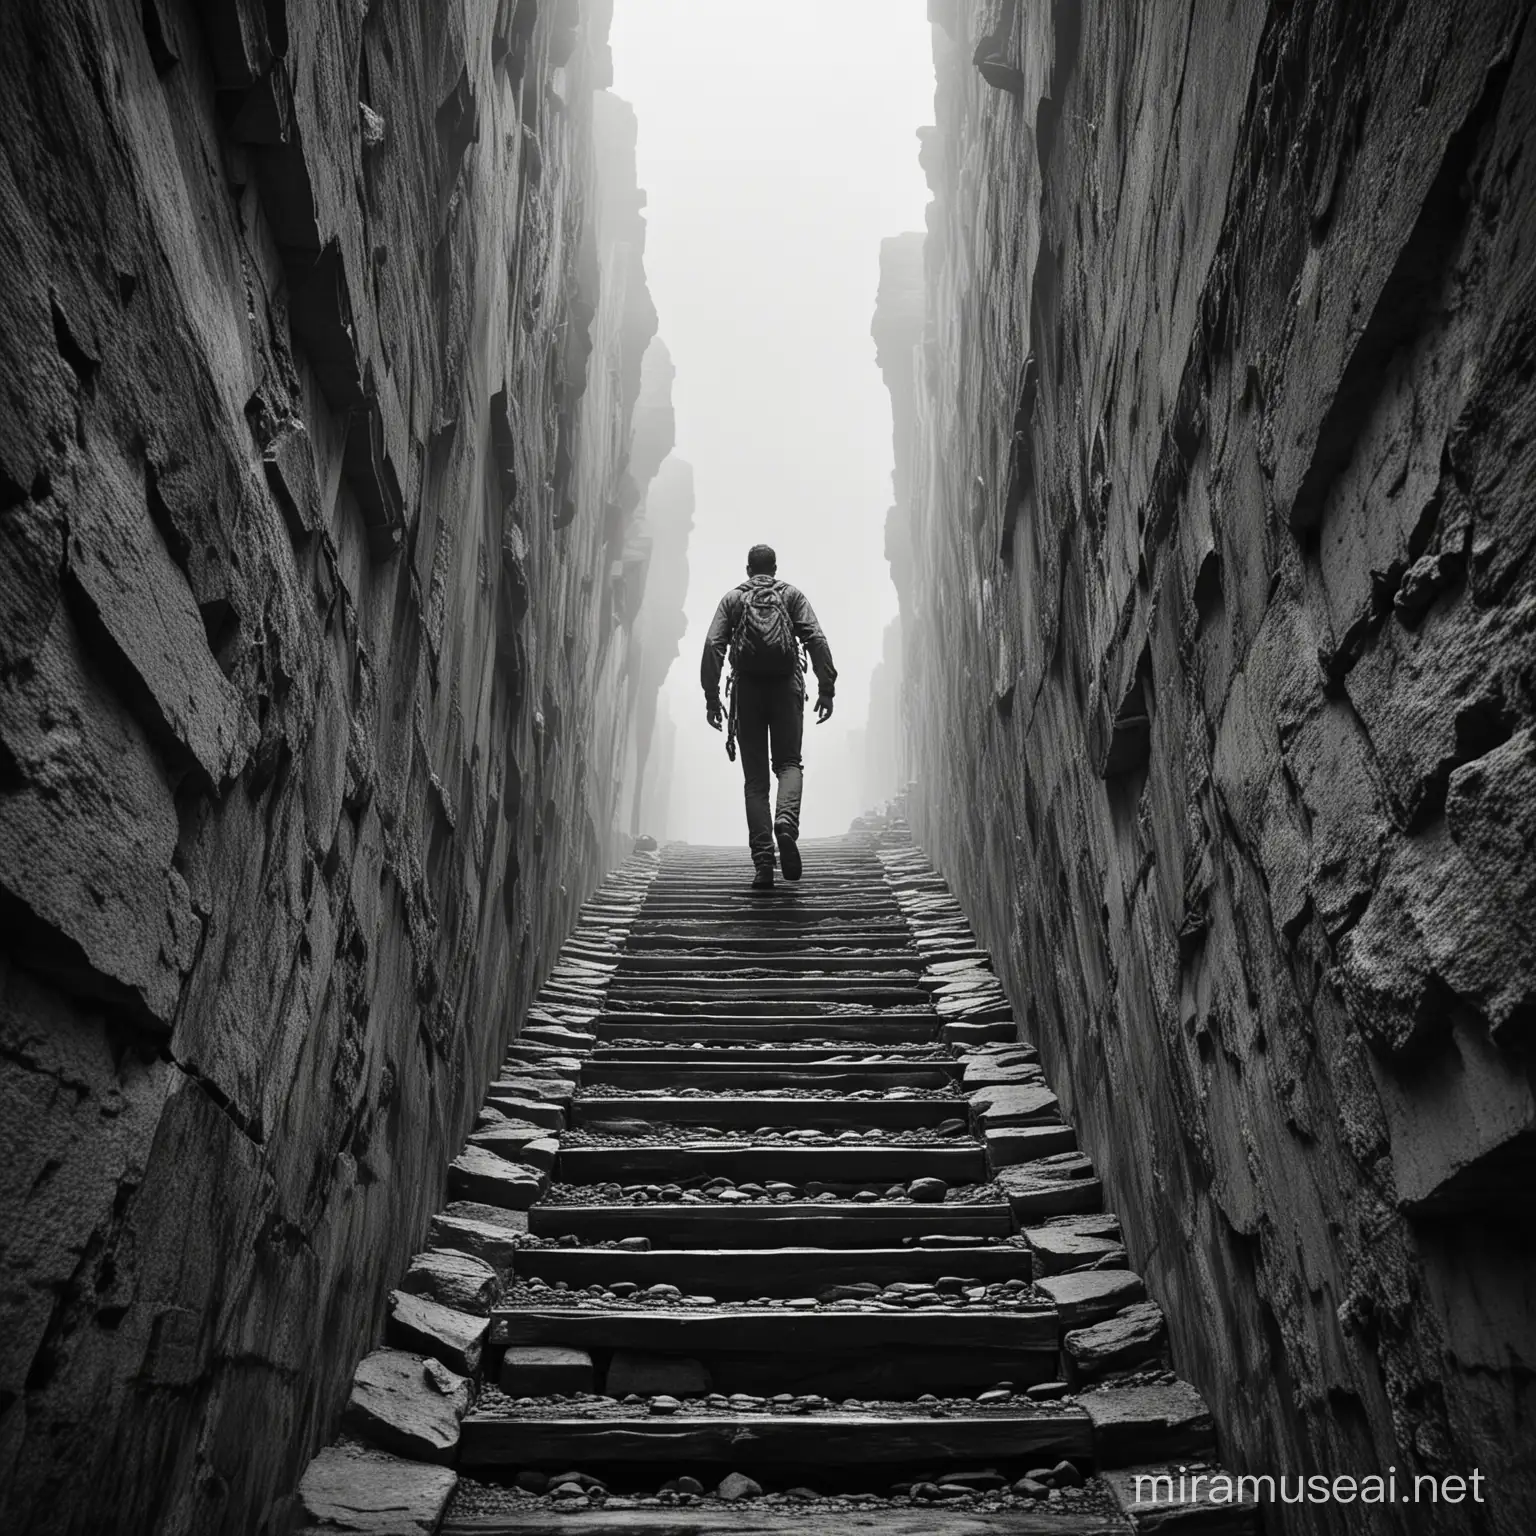  "Create an inspiring image of a rugged, masculine man climbing an infinite staircase with sheer will and determination radiating from his every step. The man should exude strength, resilience, and unwavering resolve as he conquers the seemingly endless ascent. Capture the essence of his indomitable spirit and relentless pursuit of progress against all odds."